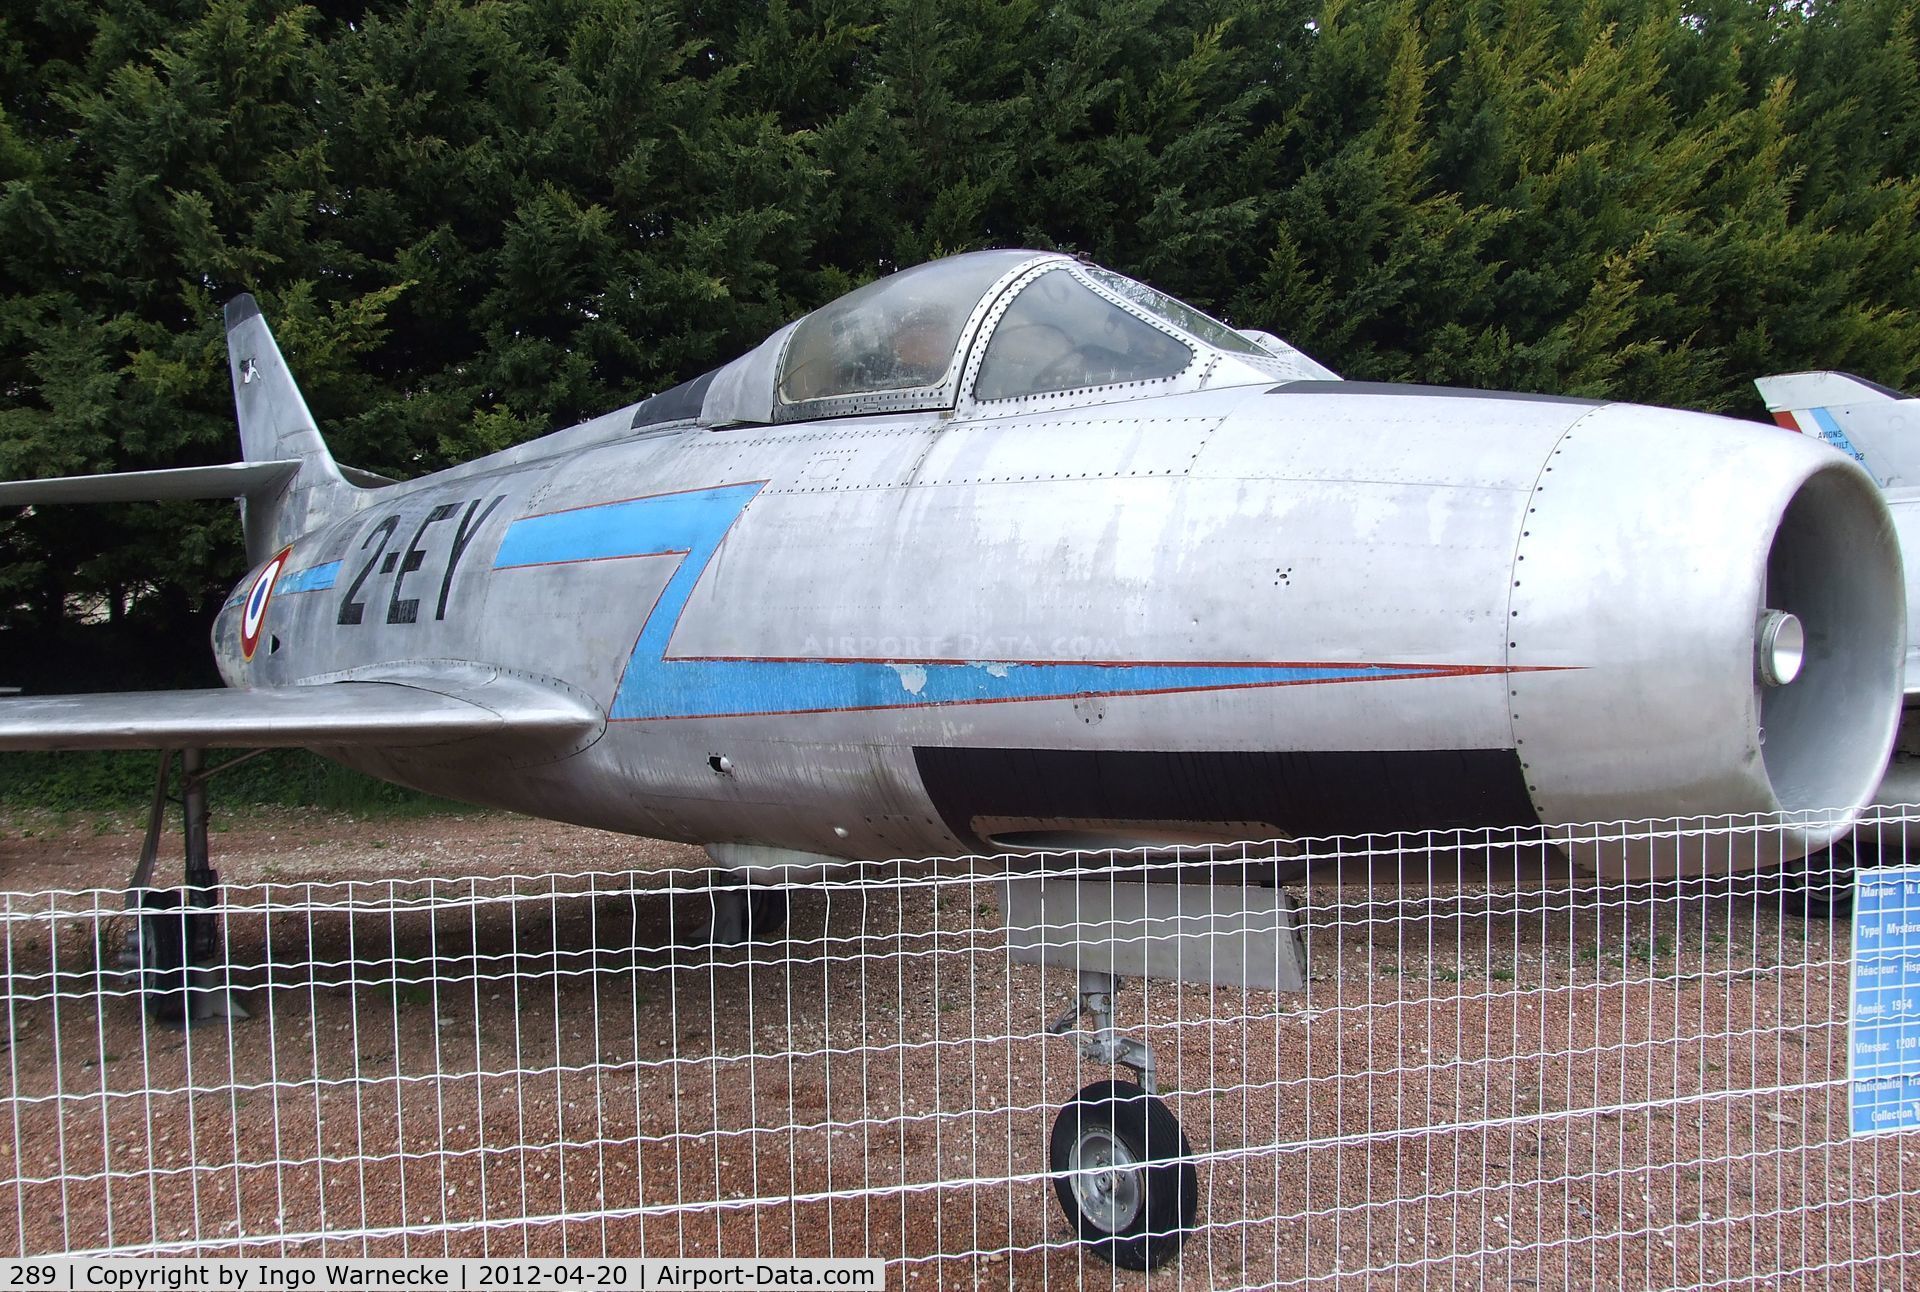 289, Dassault Mystere IVA C/N 289, Dassault Mystere IV A at the Musee de l'Aviation du Chateau, Savigny-les-Beaune